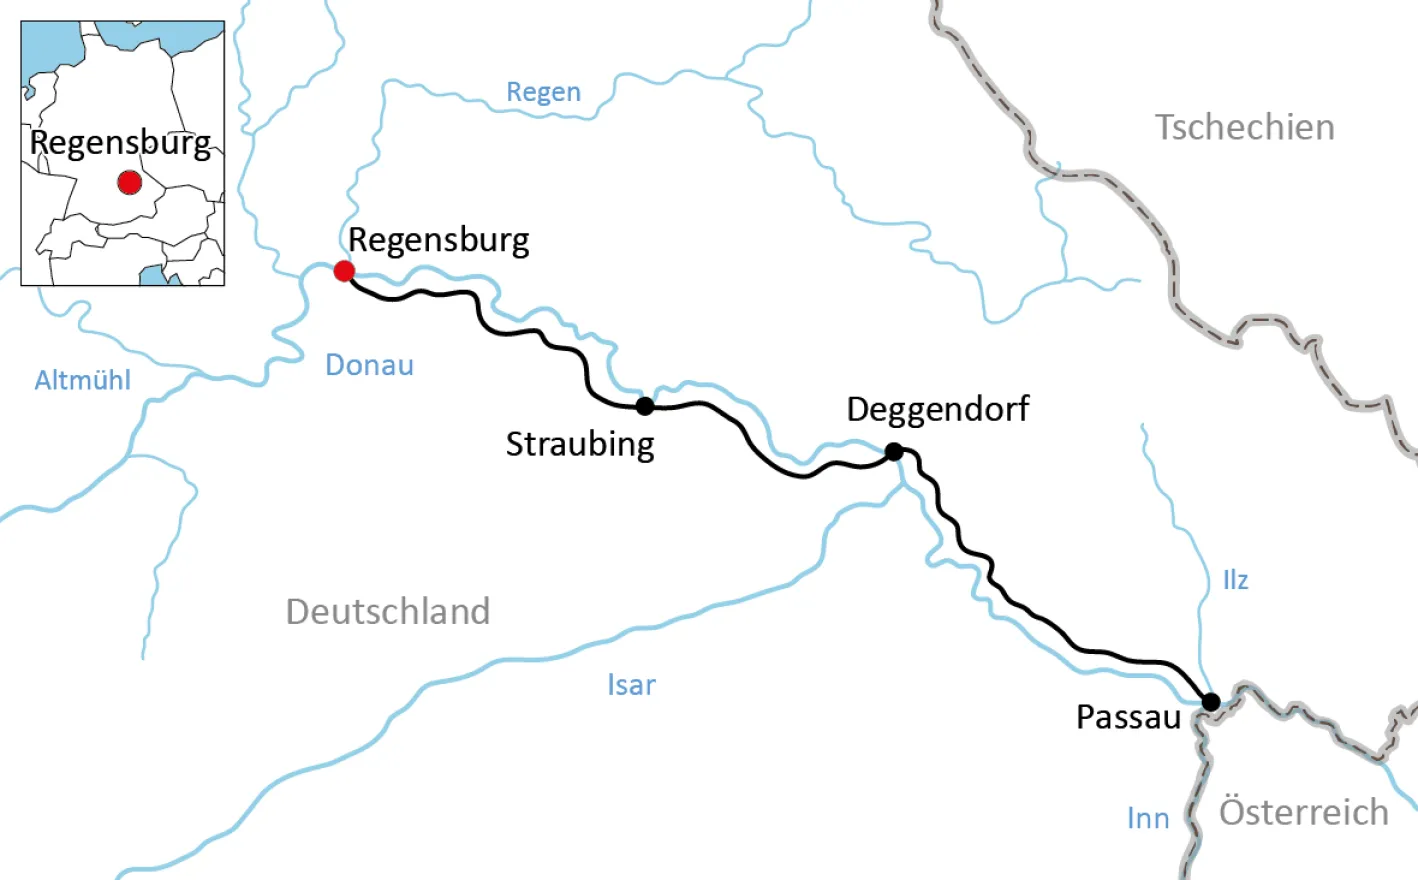 Map for the bike tour from Regensburg to Passau